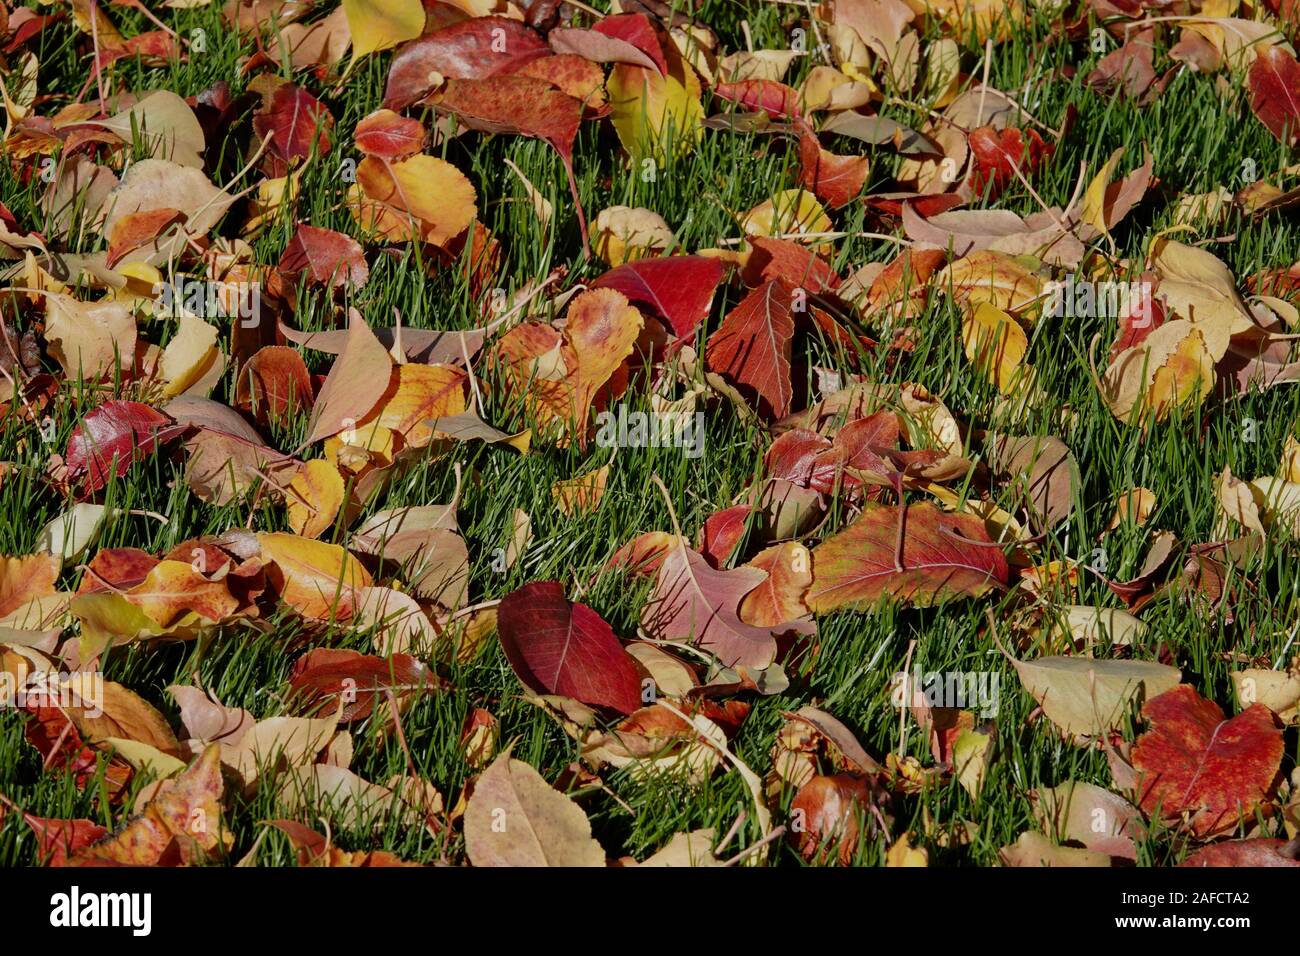 Colorful leaves cover the grass during the Fall season. Stock Photo